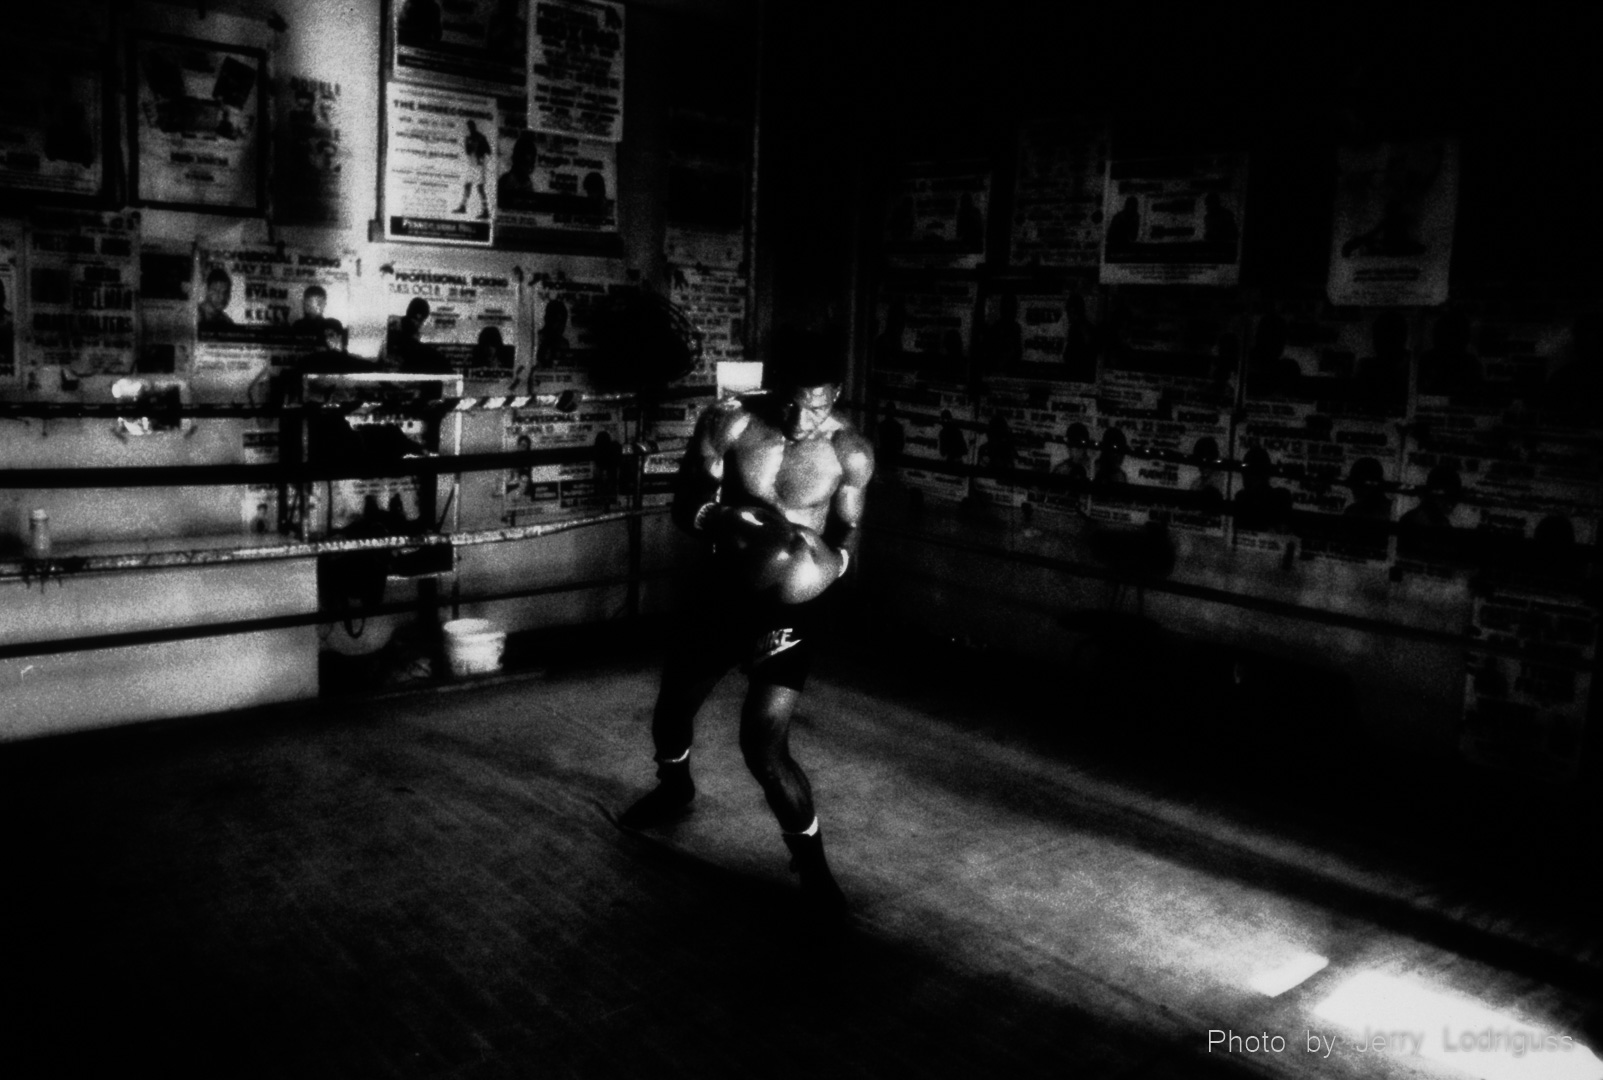 Bernard Hopkikns works on his form and footwork in a shaft of light at Champ's Gym.